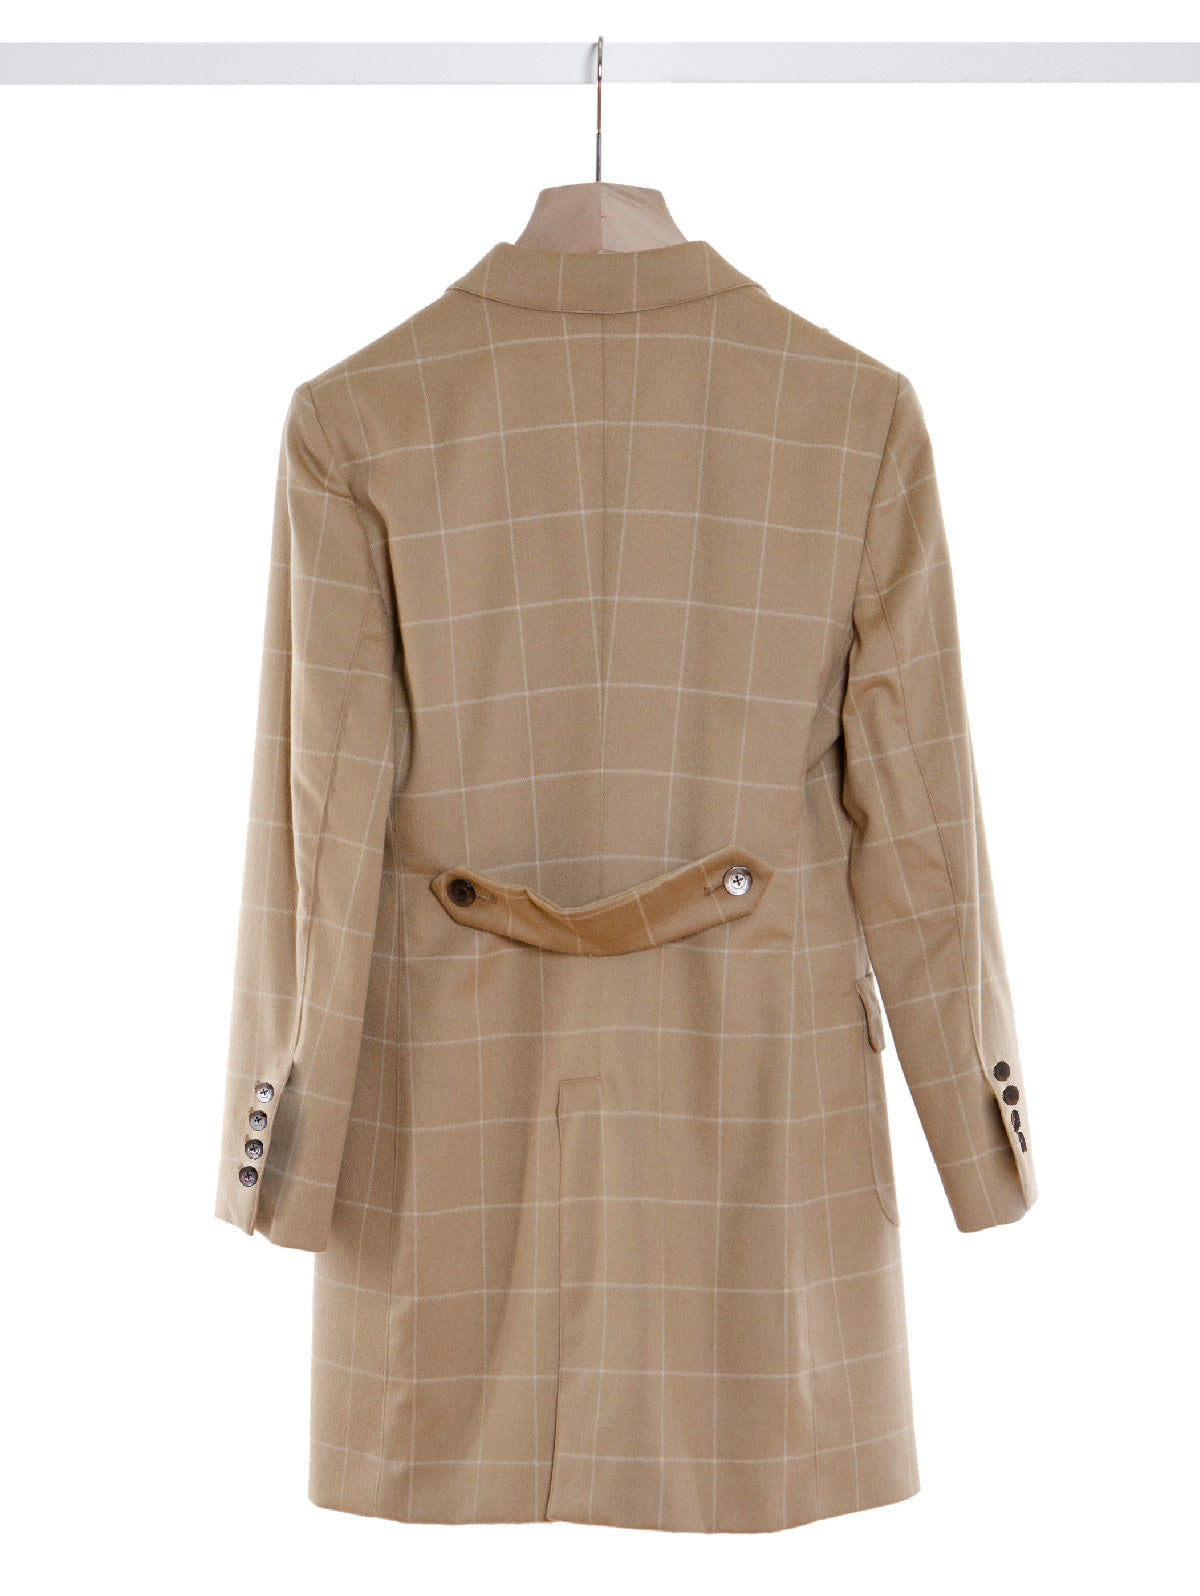 Marc Blanco Coat in Camel Cashmere